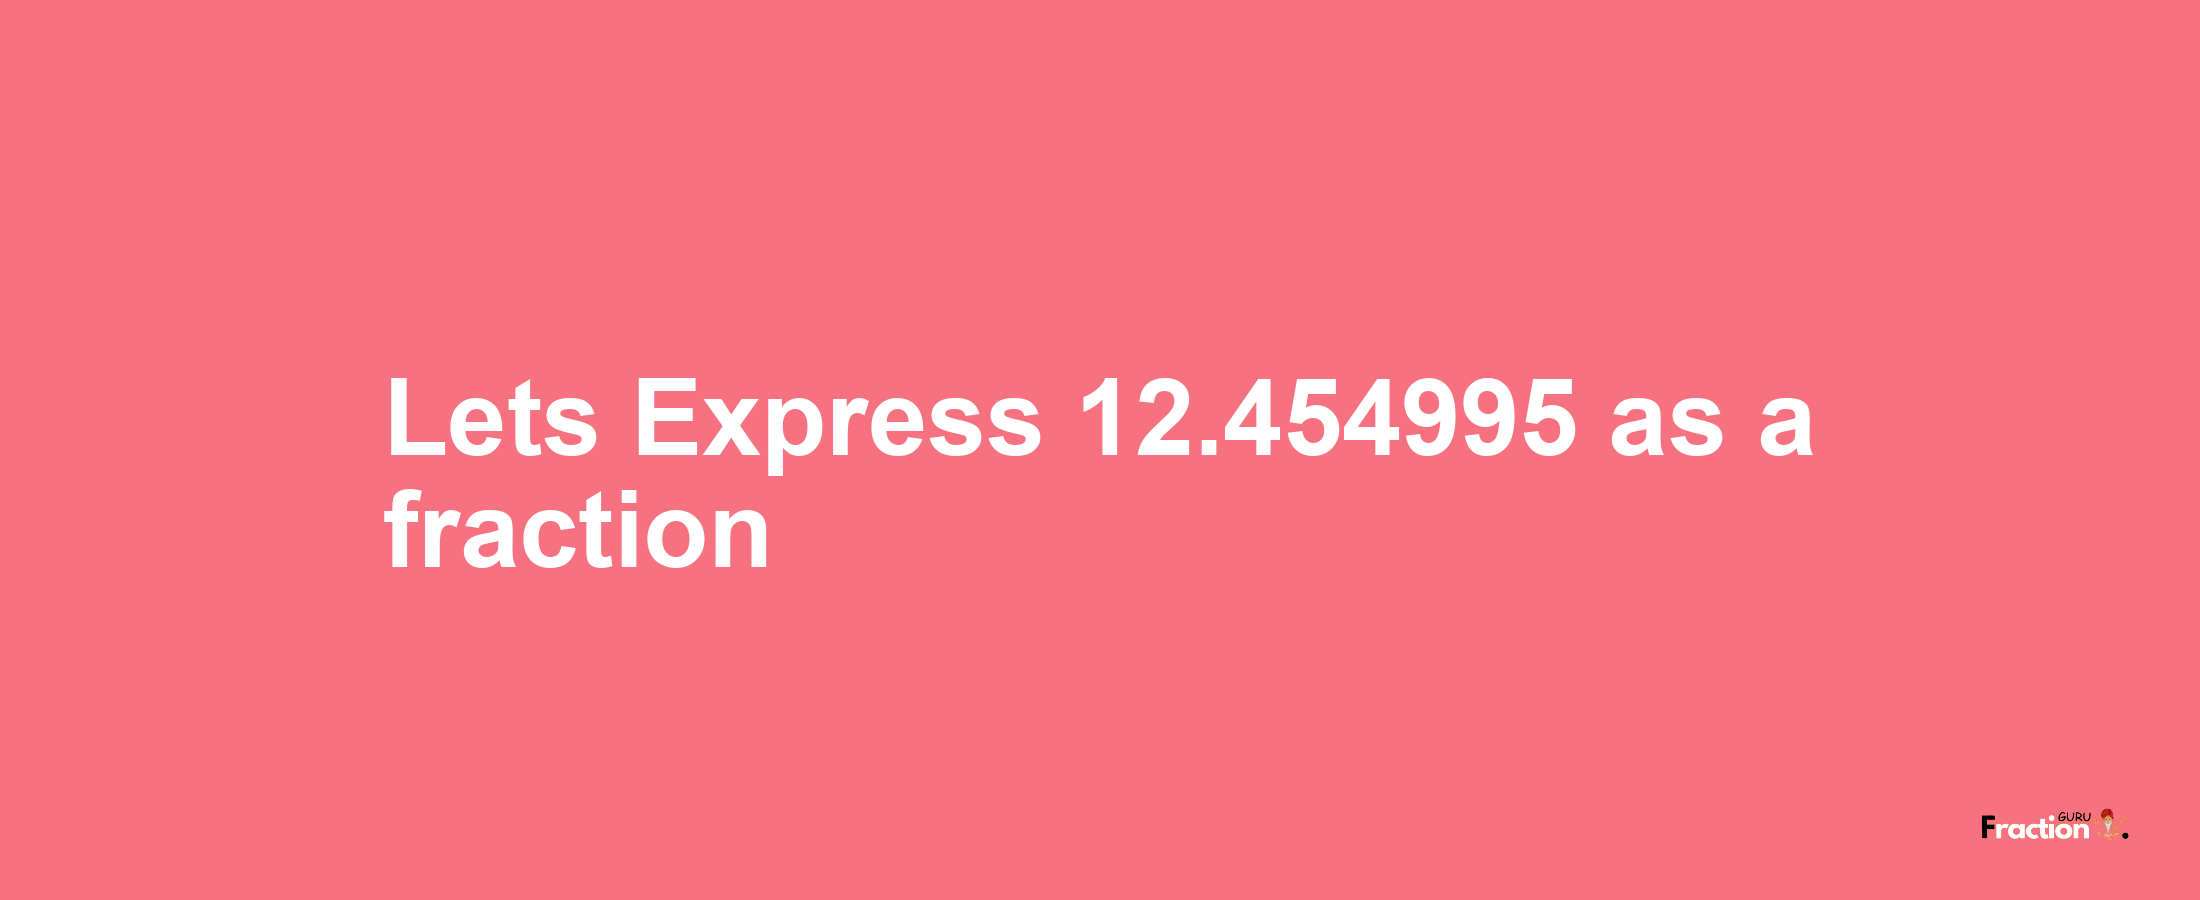 Lets Express 12.454995 as afraction